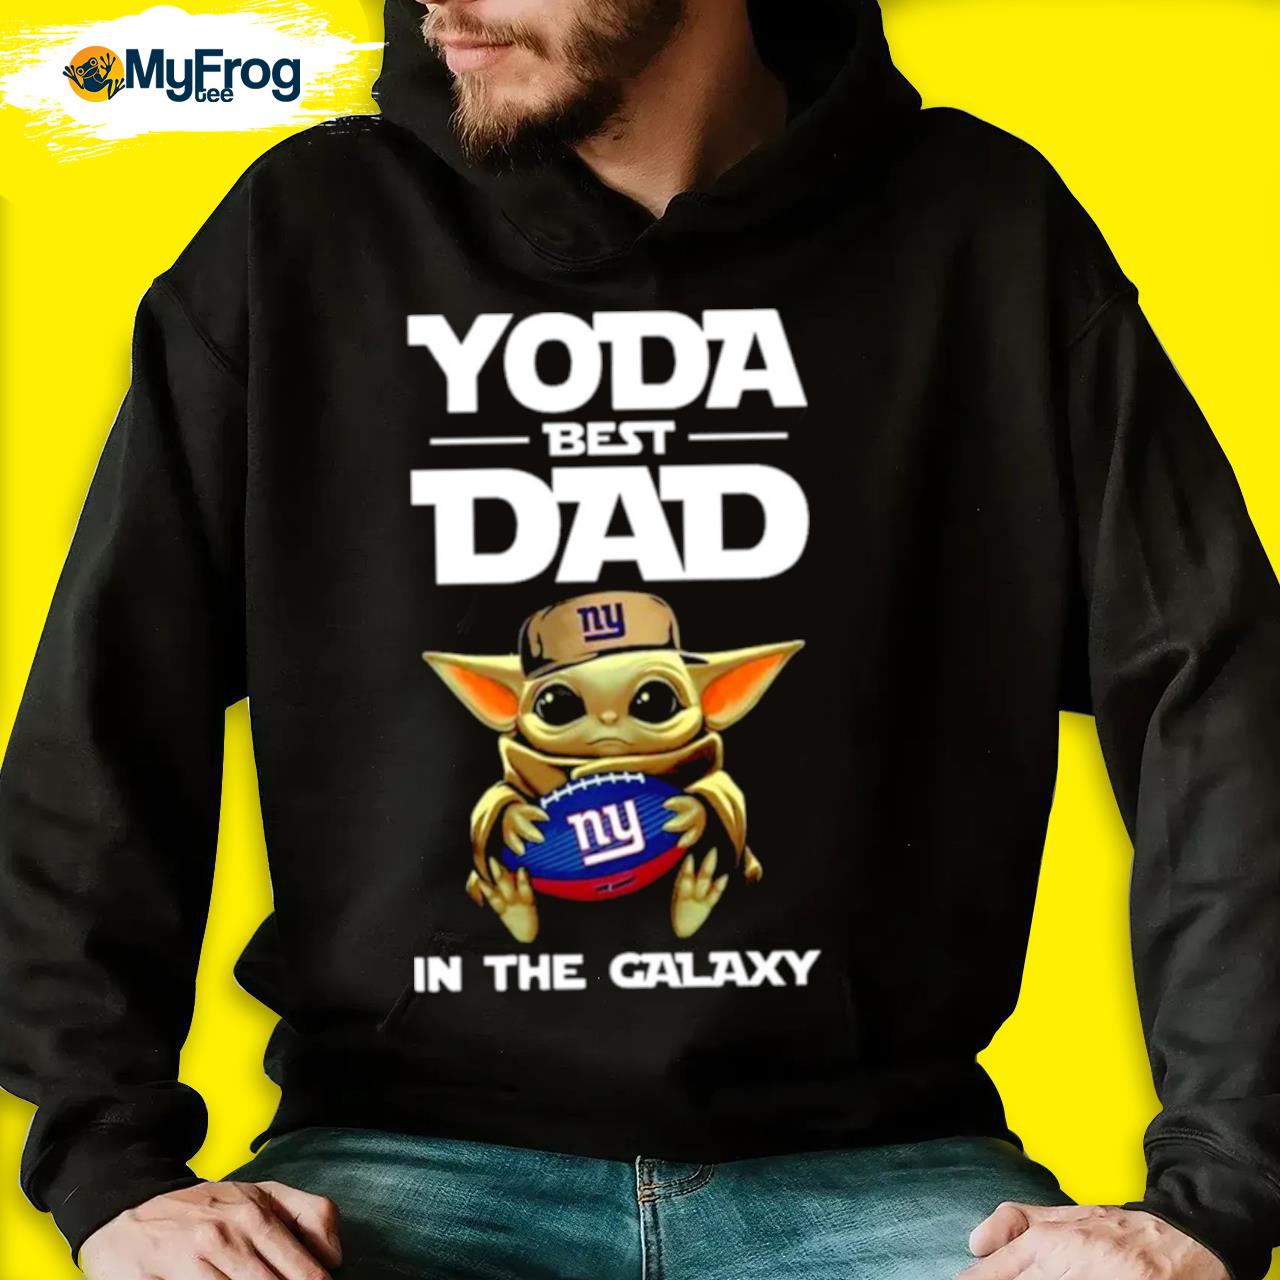 Yoda Best Dad In The Galaxy New York Giants Football Nfl Shirt,Sweater,  Hoodie, And Long Sleeved, Ladies, Tank Top